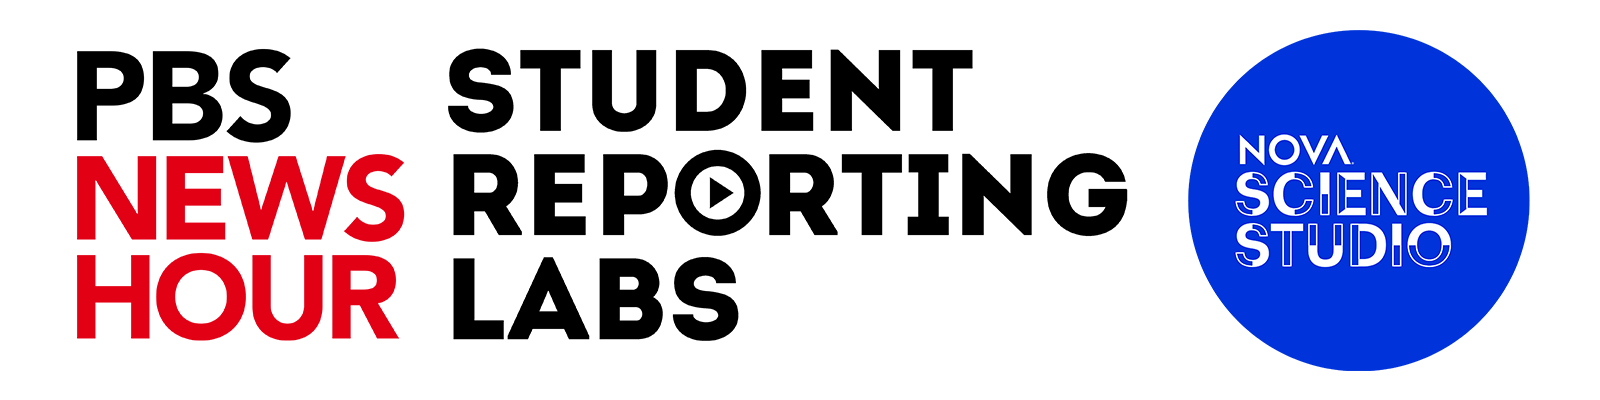 PBS NewsHour Student Reporting Labs Banner